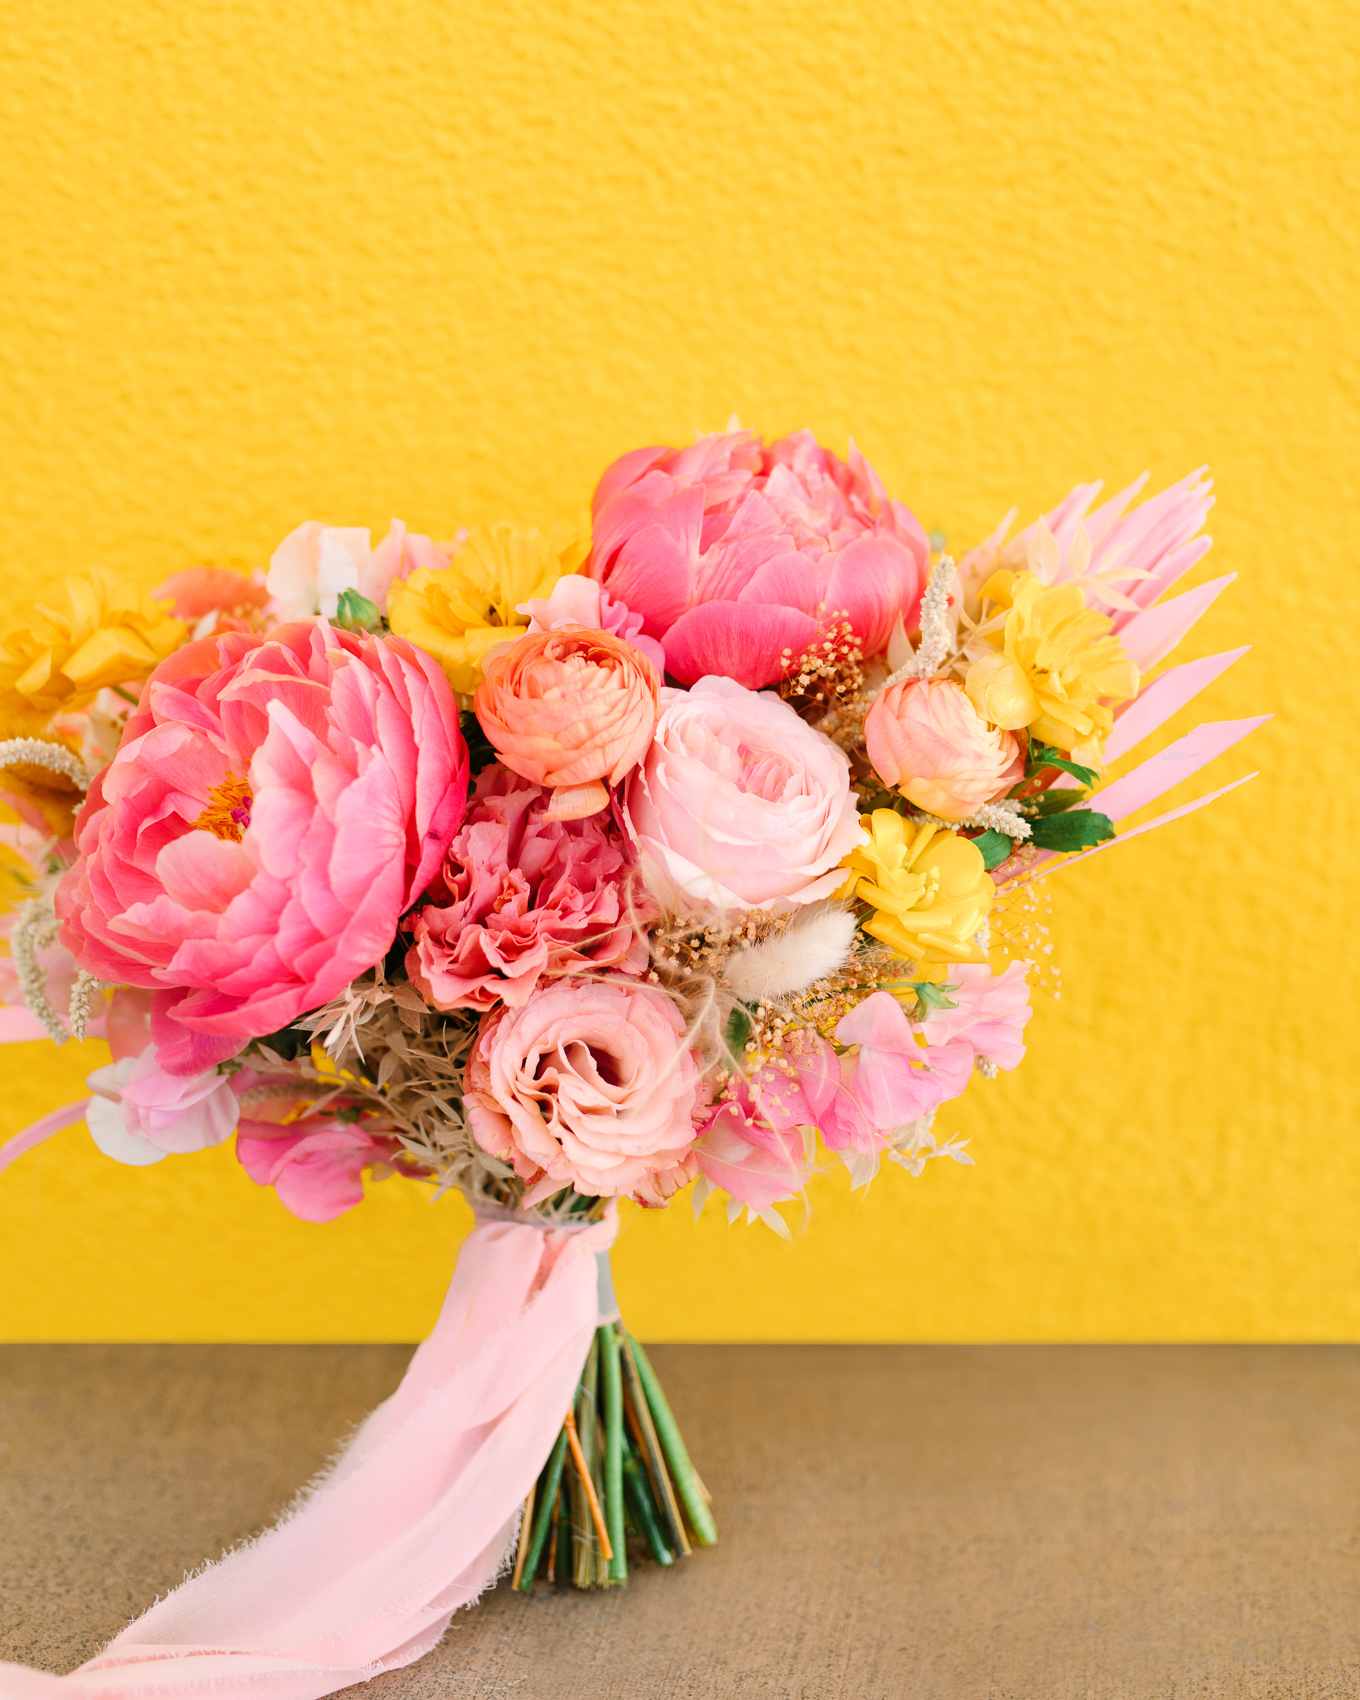 Colorful pink peony bouquet at Saguaro Palm Springs | Beautiful bridal bouquet inspiration and advice | Colorful and elevated wedding photography for fun-loving couples in Southern California | #weddingflowers #weddingbouquet #bridebouquet #bouquetideas #uniquebouquet   Source: Mary Costa Photography | Los Angeles